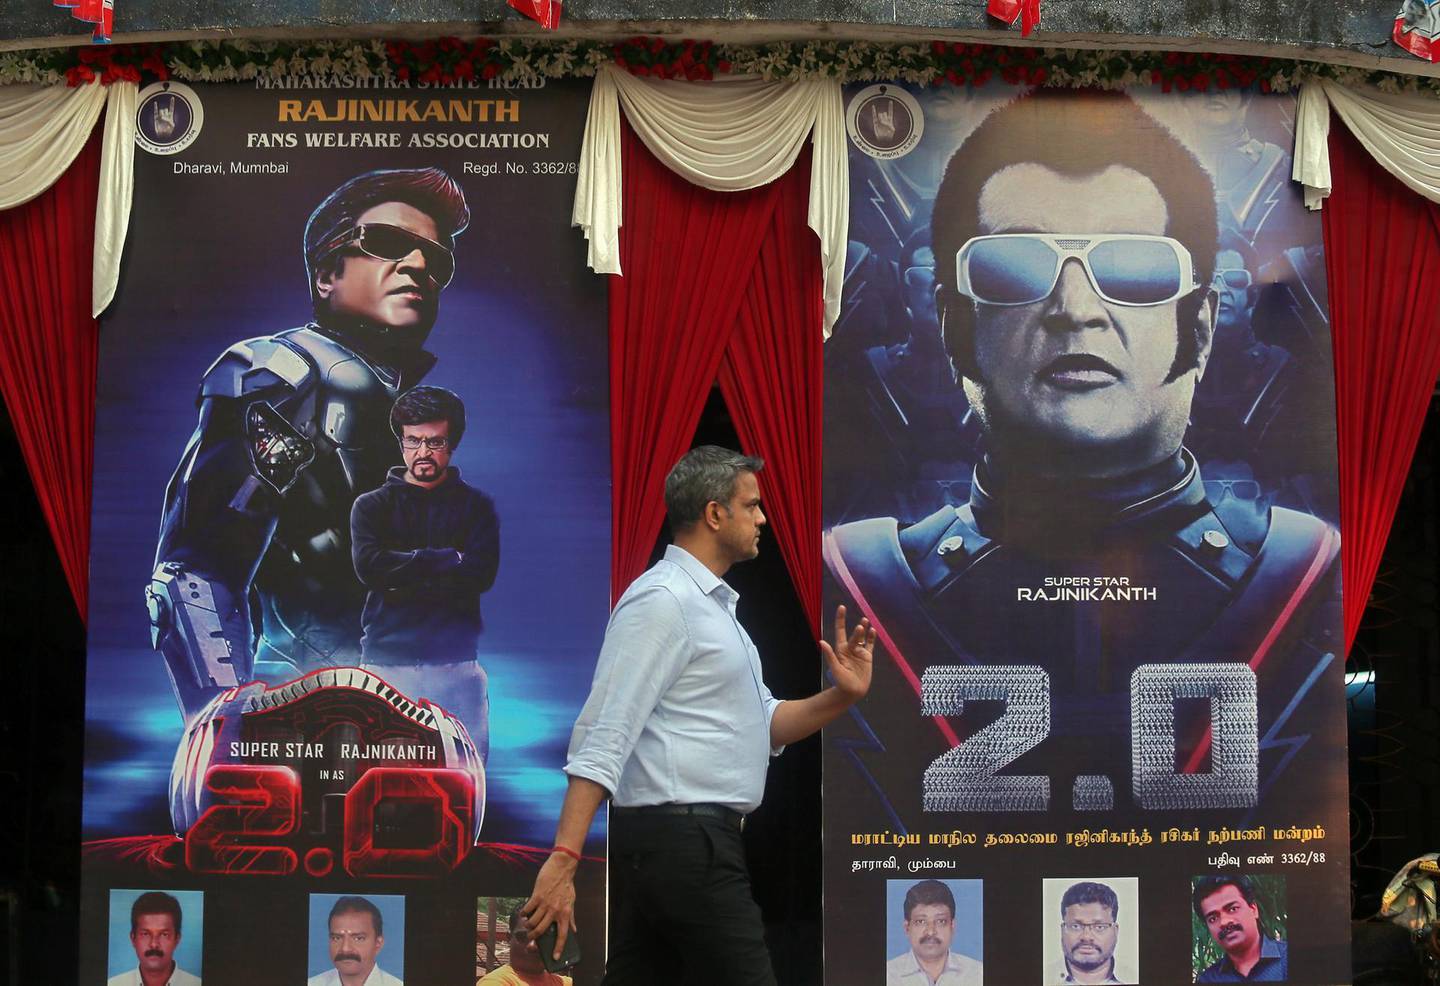 A man walks past a cinema decorated with posters of Tamil film star Rajinikanth's new movie "2.0" on the eve of its release, in Mumbai, India, November 28, 2018. REUTERS/Francis Mascarenhas